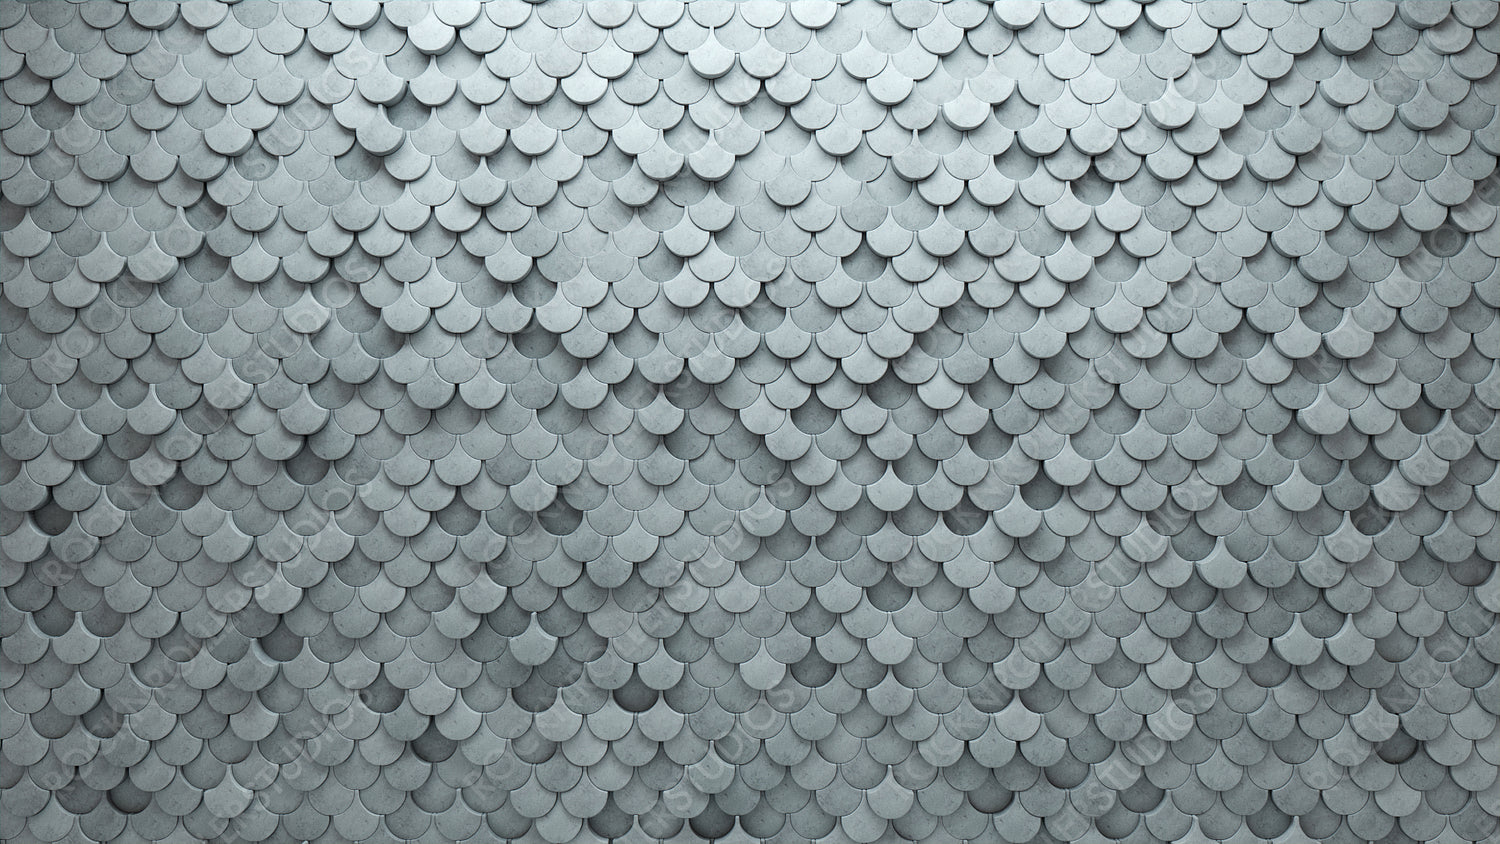 Concrete, Polished Wall background with tiles. Futuristic, tile Wallpaper with Fish Scale, 3D blocks. 3D Render